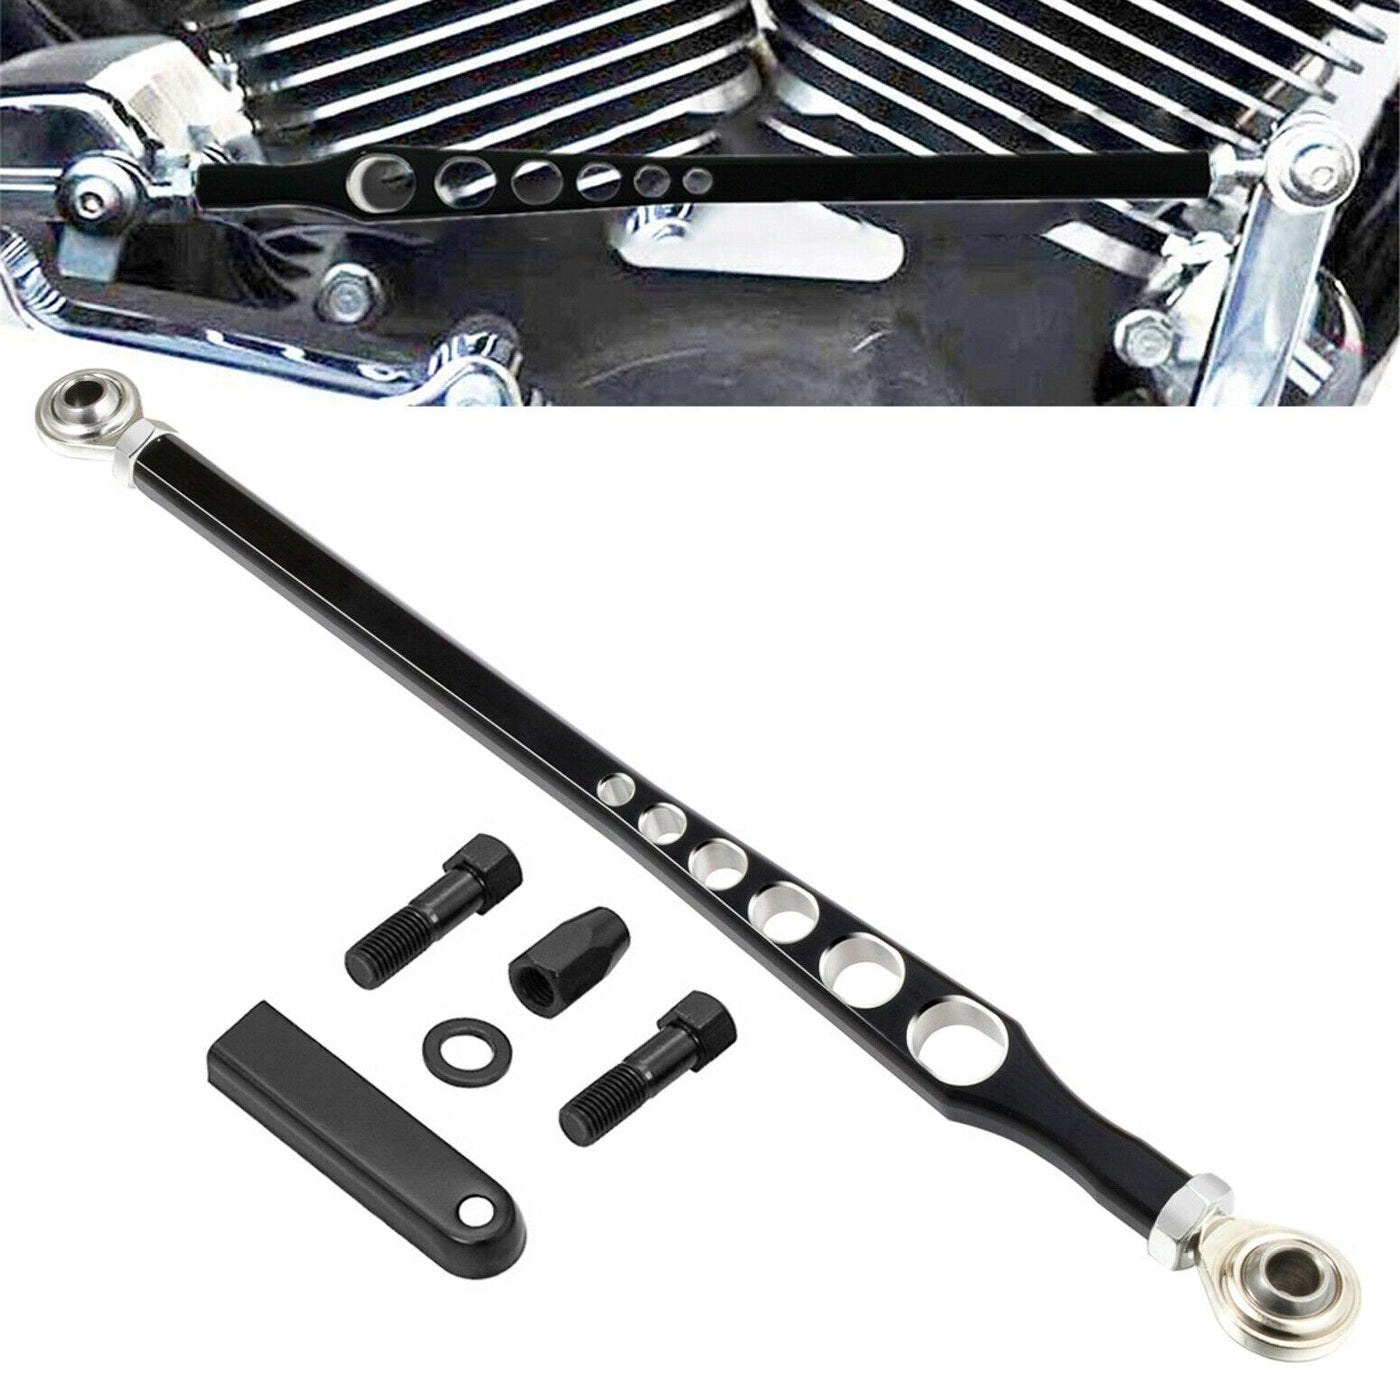 Black Gear Shift Linkage Fit For Harley Touring Road Street Electra Glide 80-21 - Moto Life Products